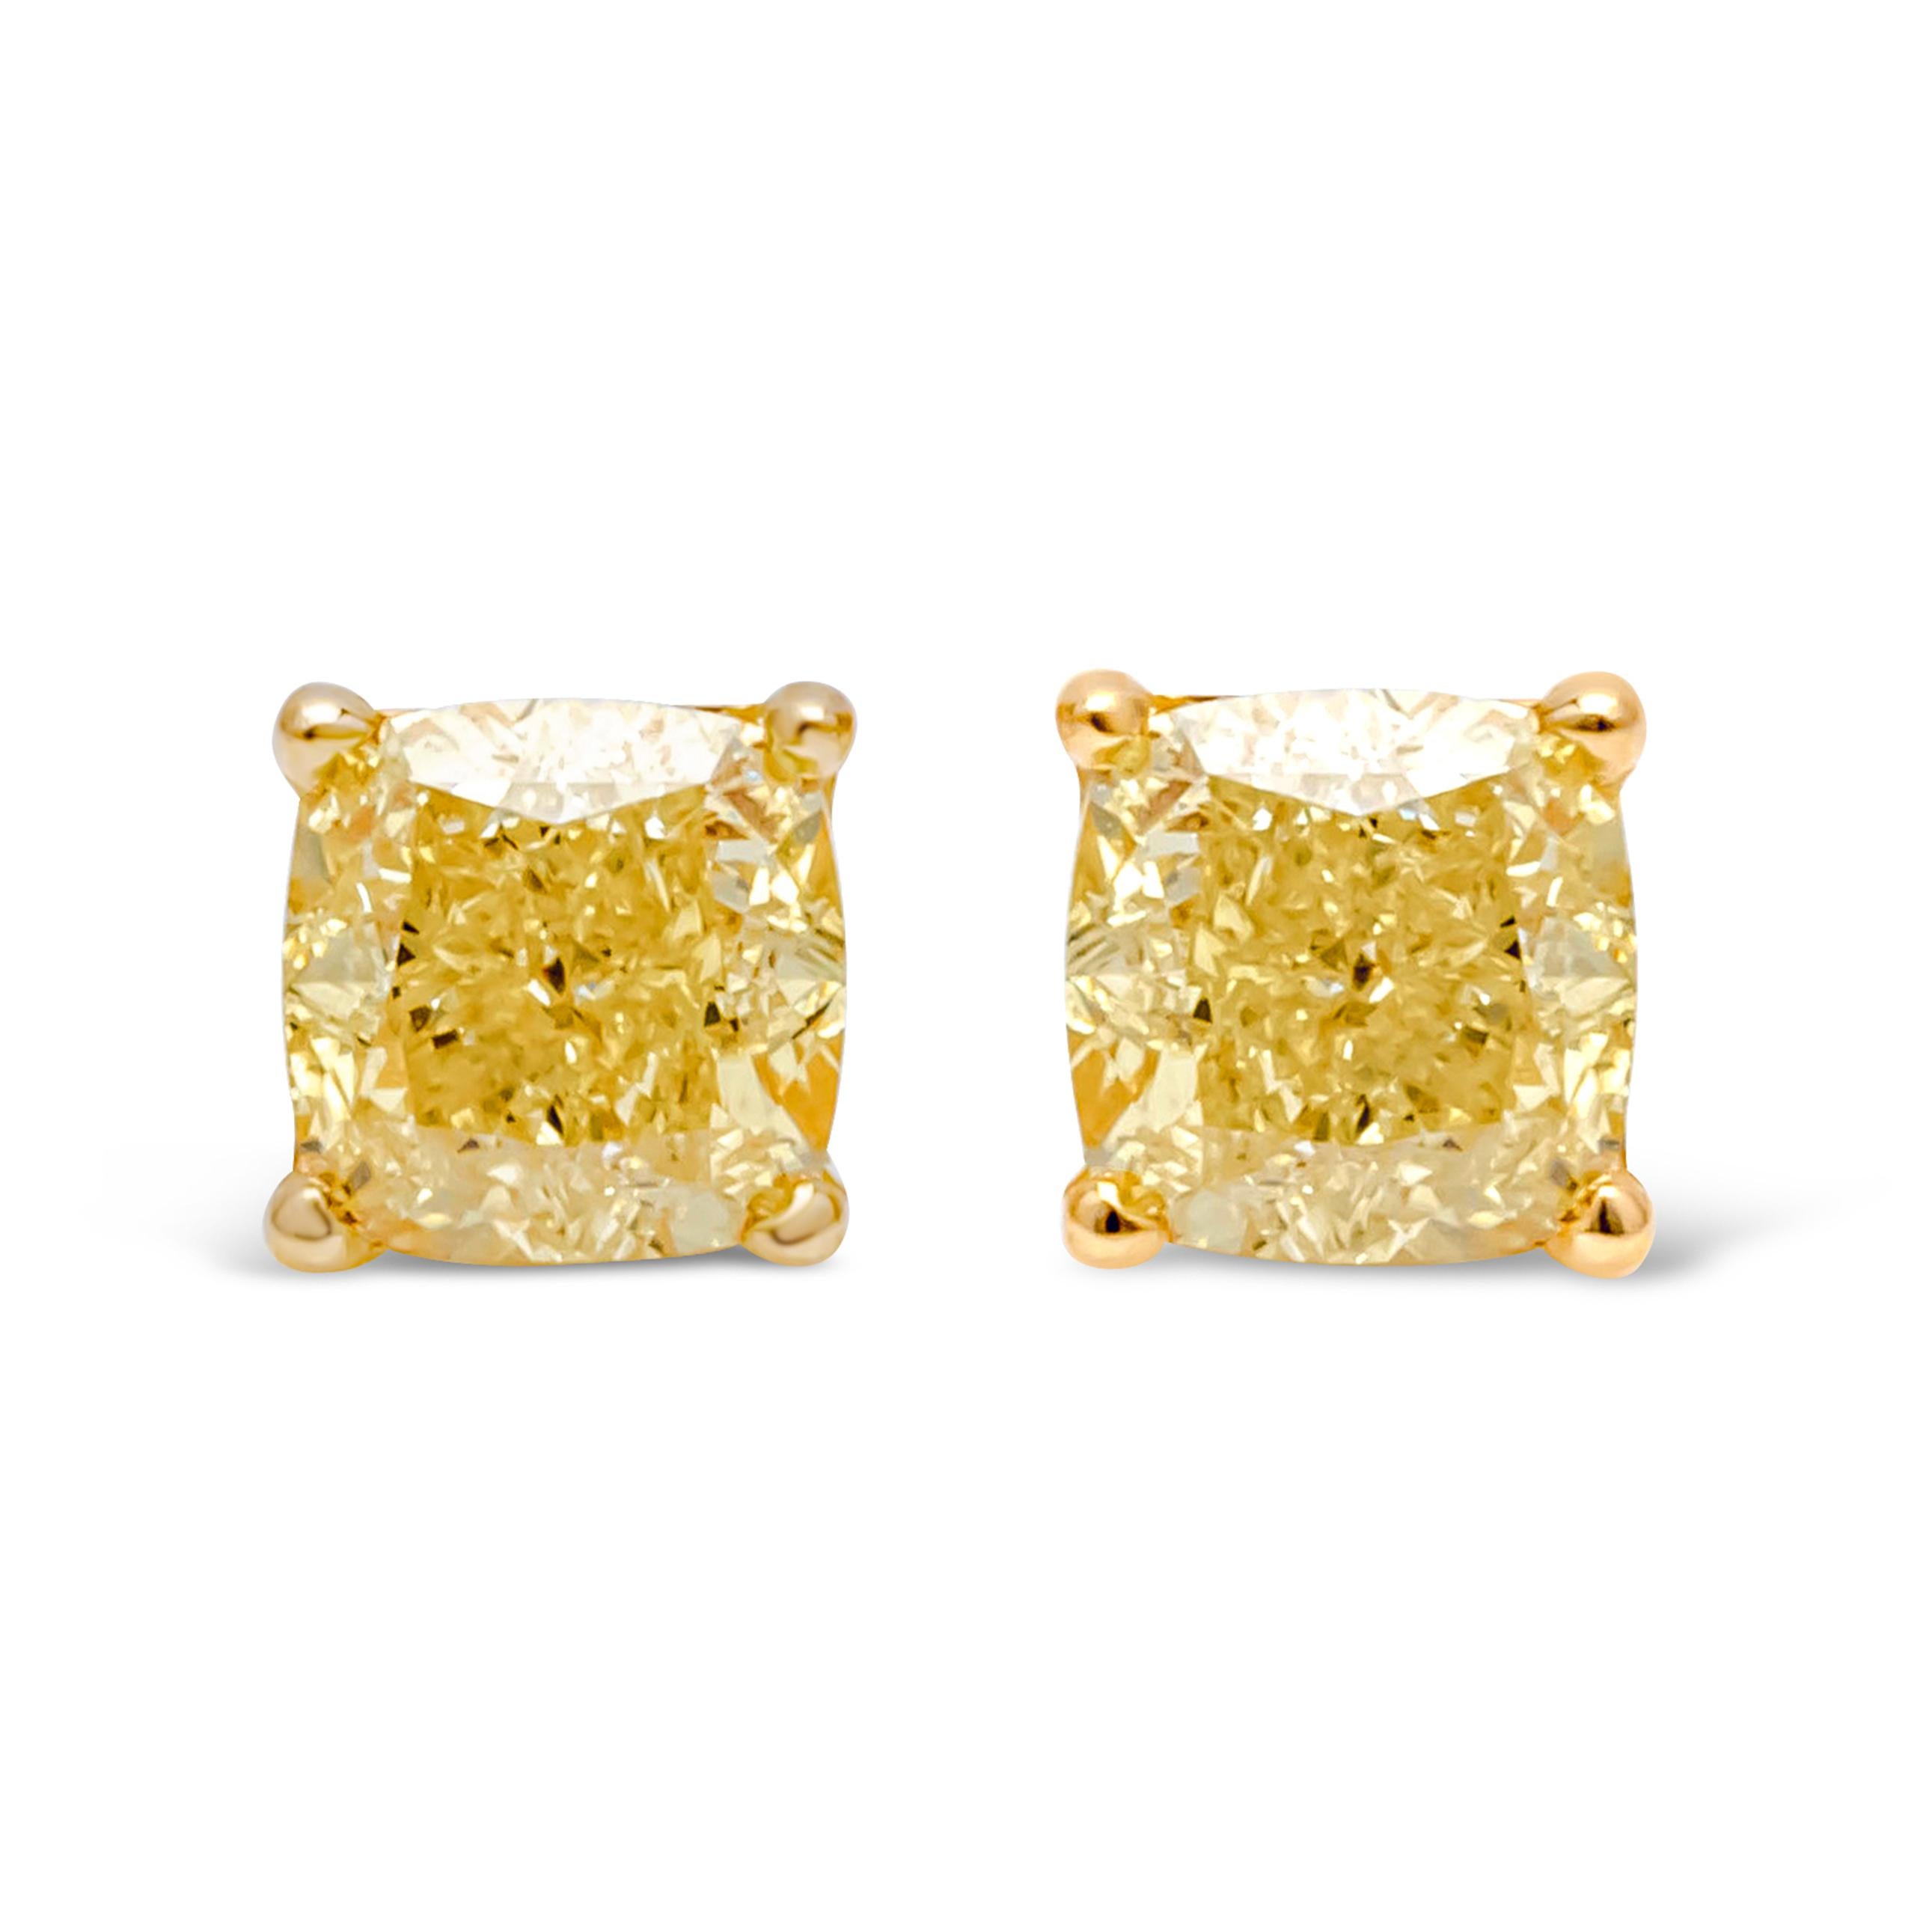 A simple and vibrant pair of stud earrings showcasing a color-rich cushion cut fancy Intense yellow diamonds weighing 0.85 carats total, VS+ in Clarity. Set in a timeless four prong push back setting and Finely made in 18k yellow gold.

Roman